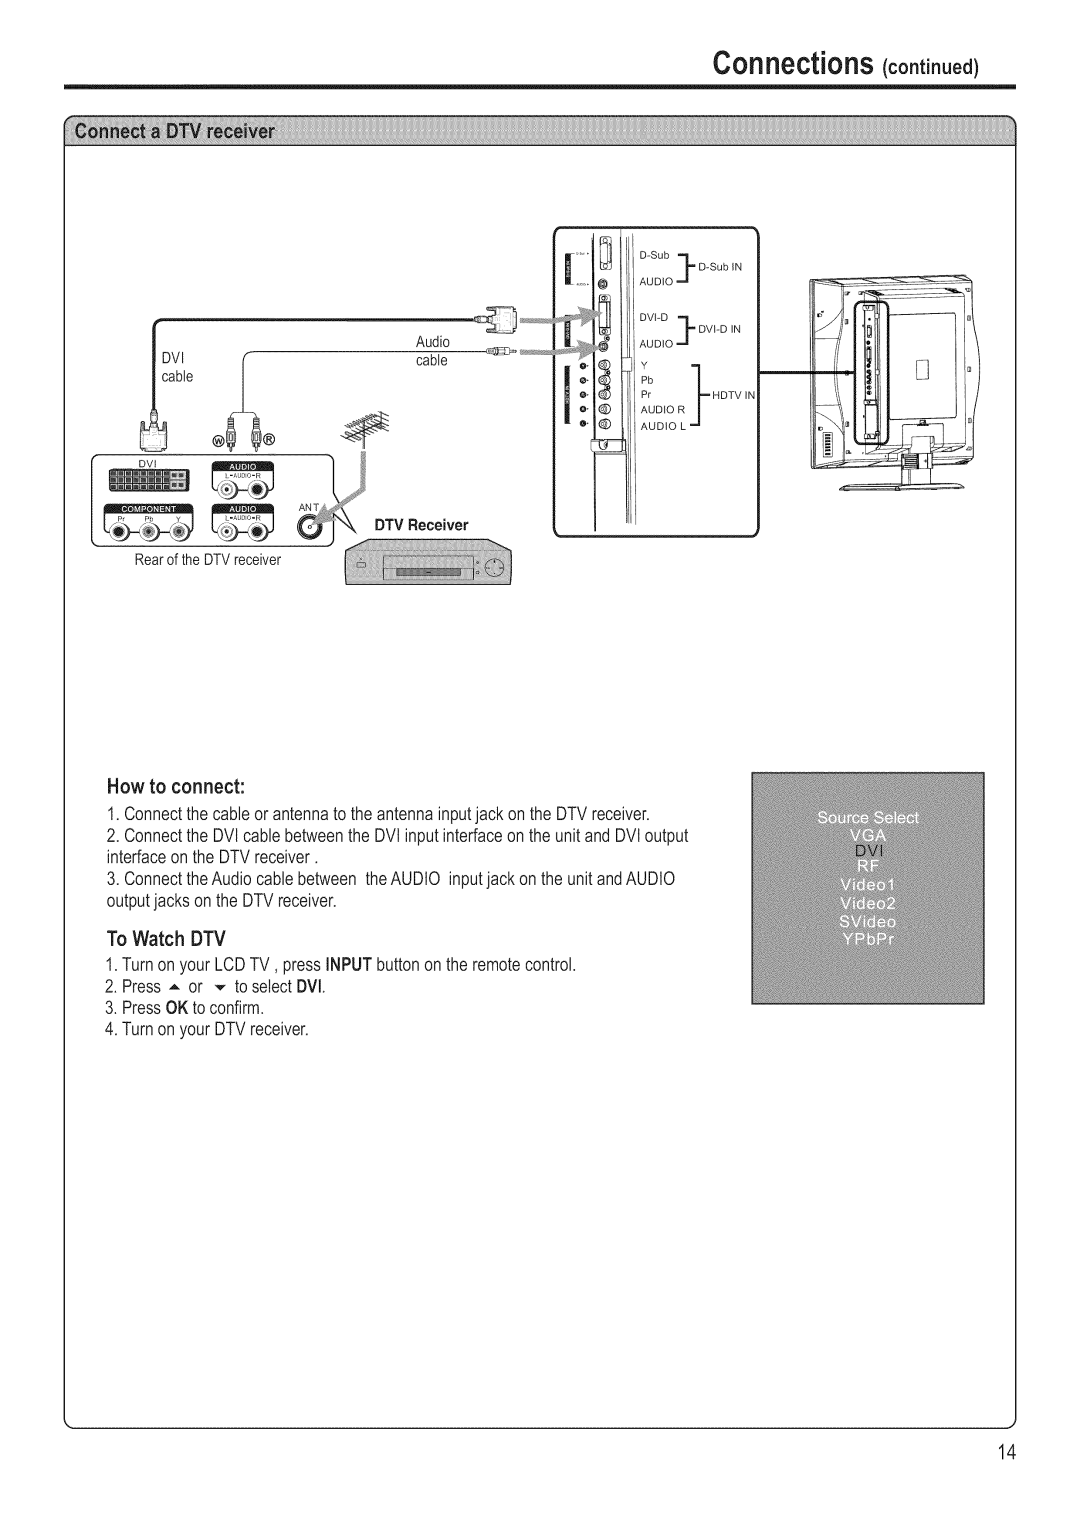 Polaroid FLM-3201 manual Connectionscontinued, DTV Receiver 